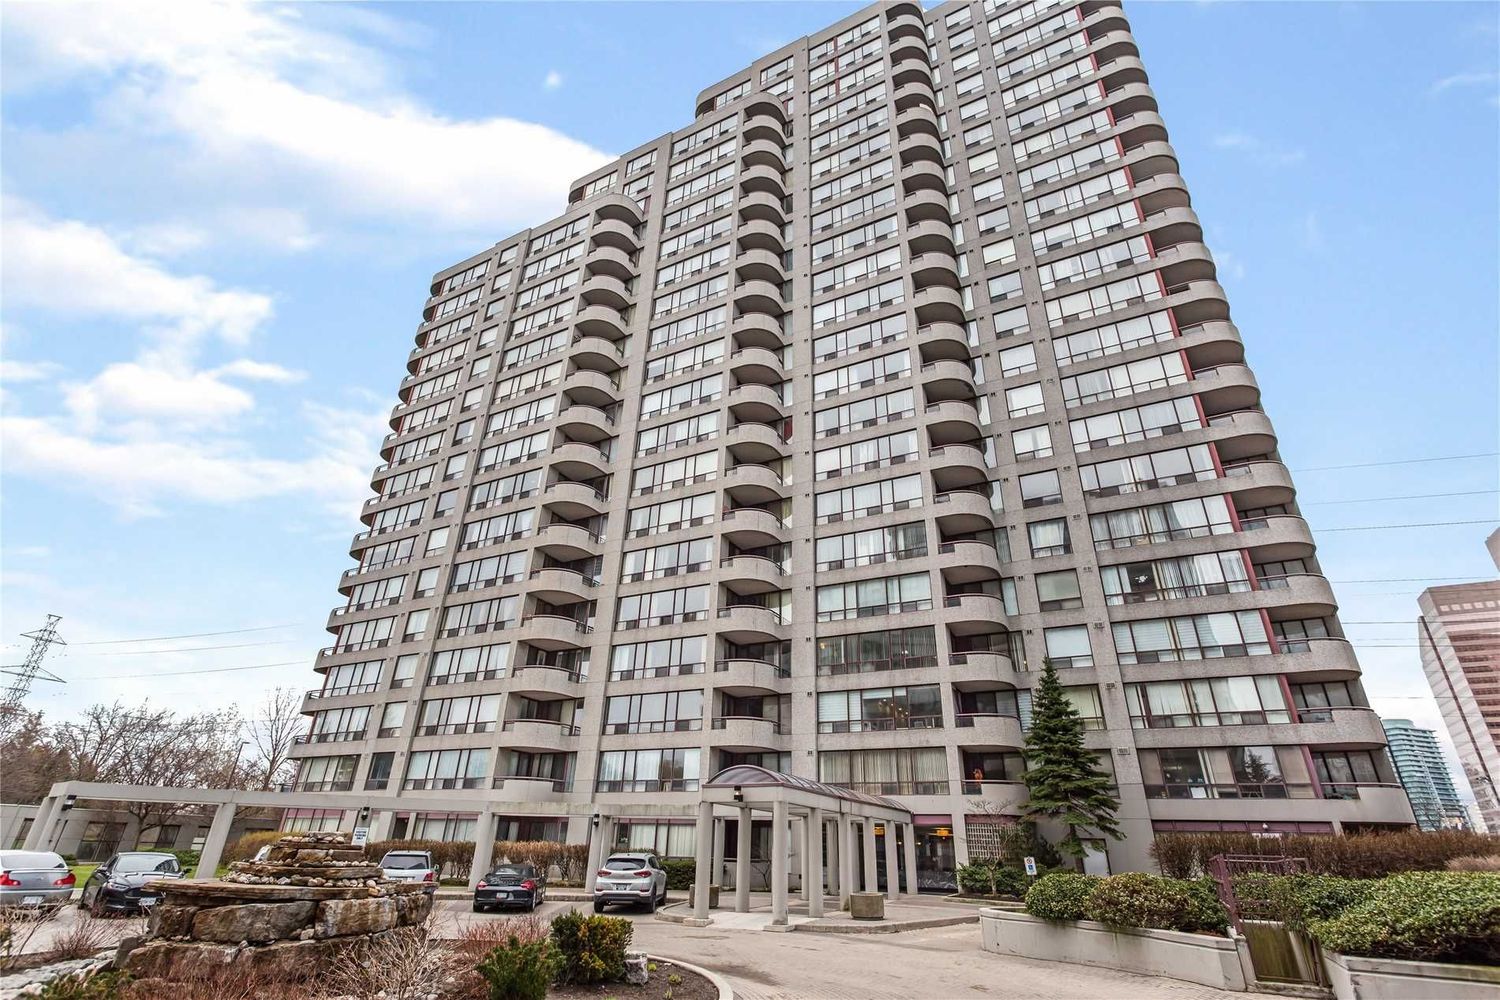 5765 Yonge Street. Place Nouveau II Condos is located in  North York, Toronto - image #1 of 2